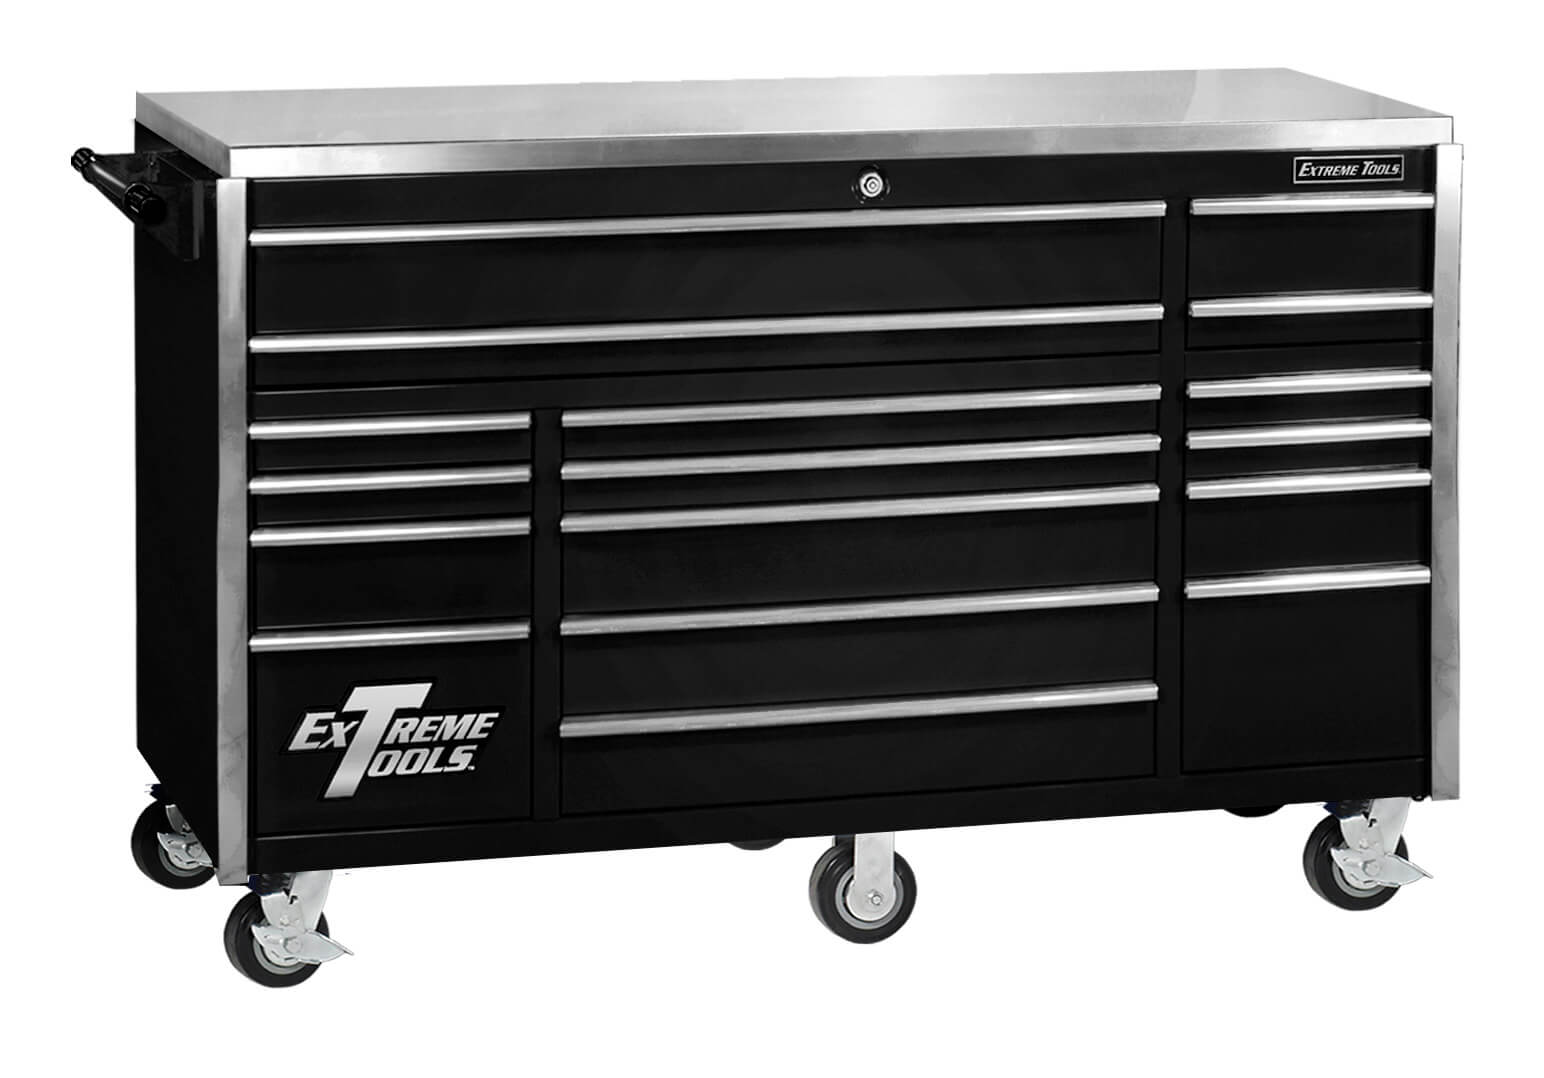 EXTREME TOOLS® 72 inch 17 DRAWER TRIPLE BANK PROFESSIONAL ROLLER CABINET